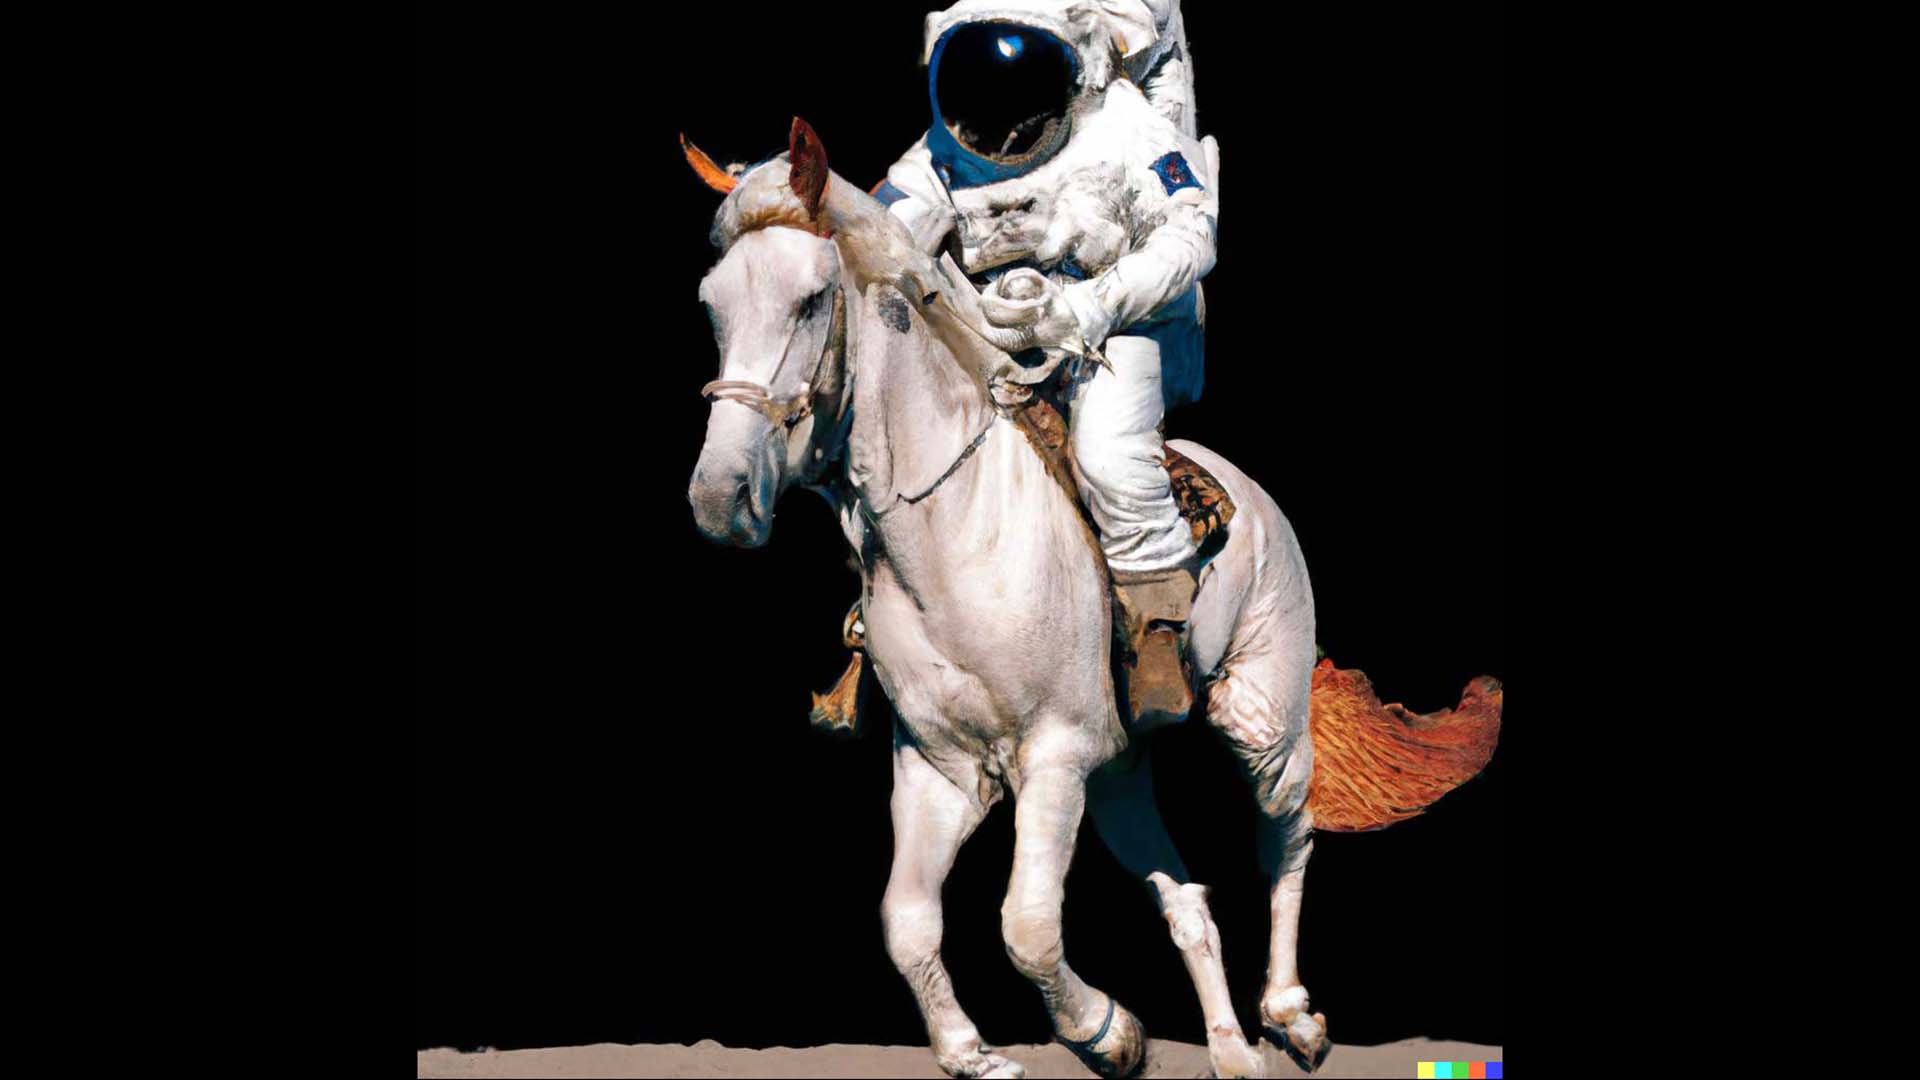 If you've always wanted an image of an astronaut riding a horse, you've come to the right place!